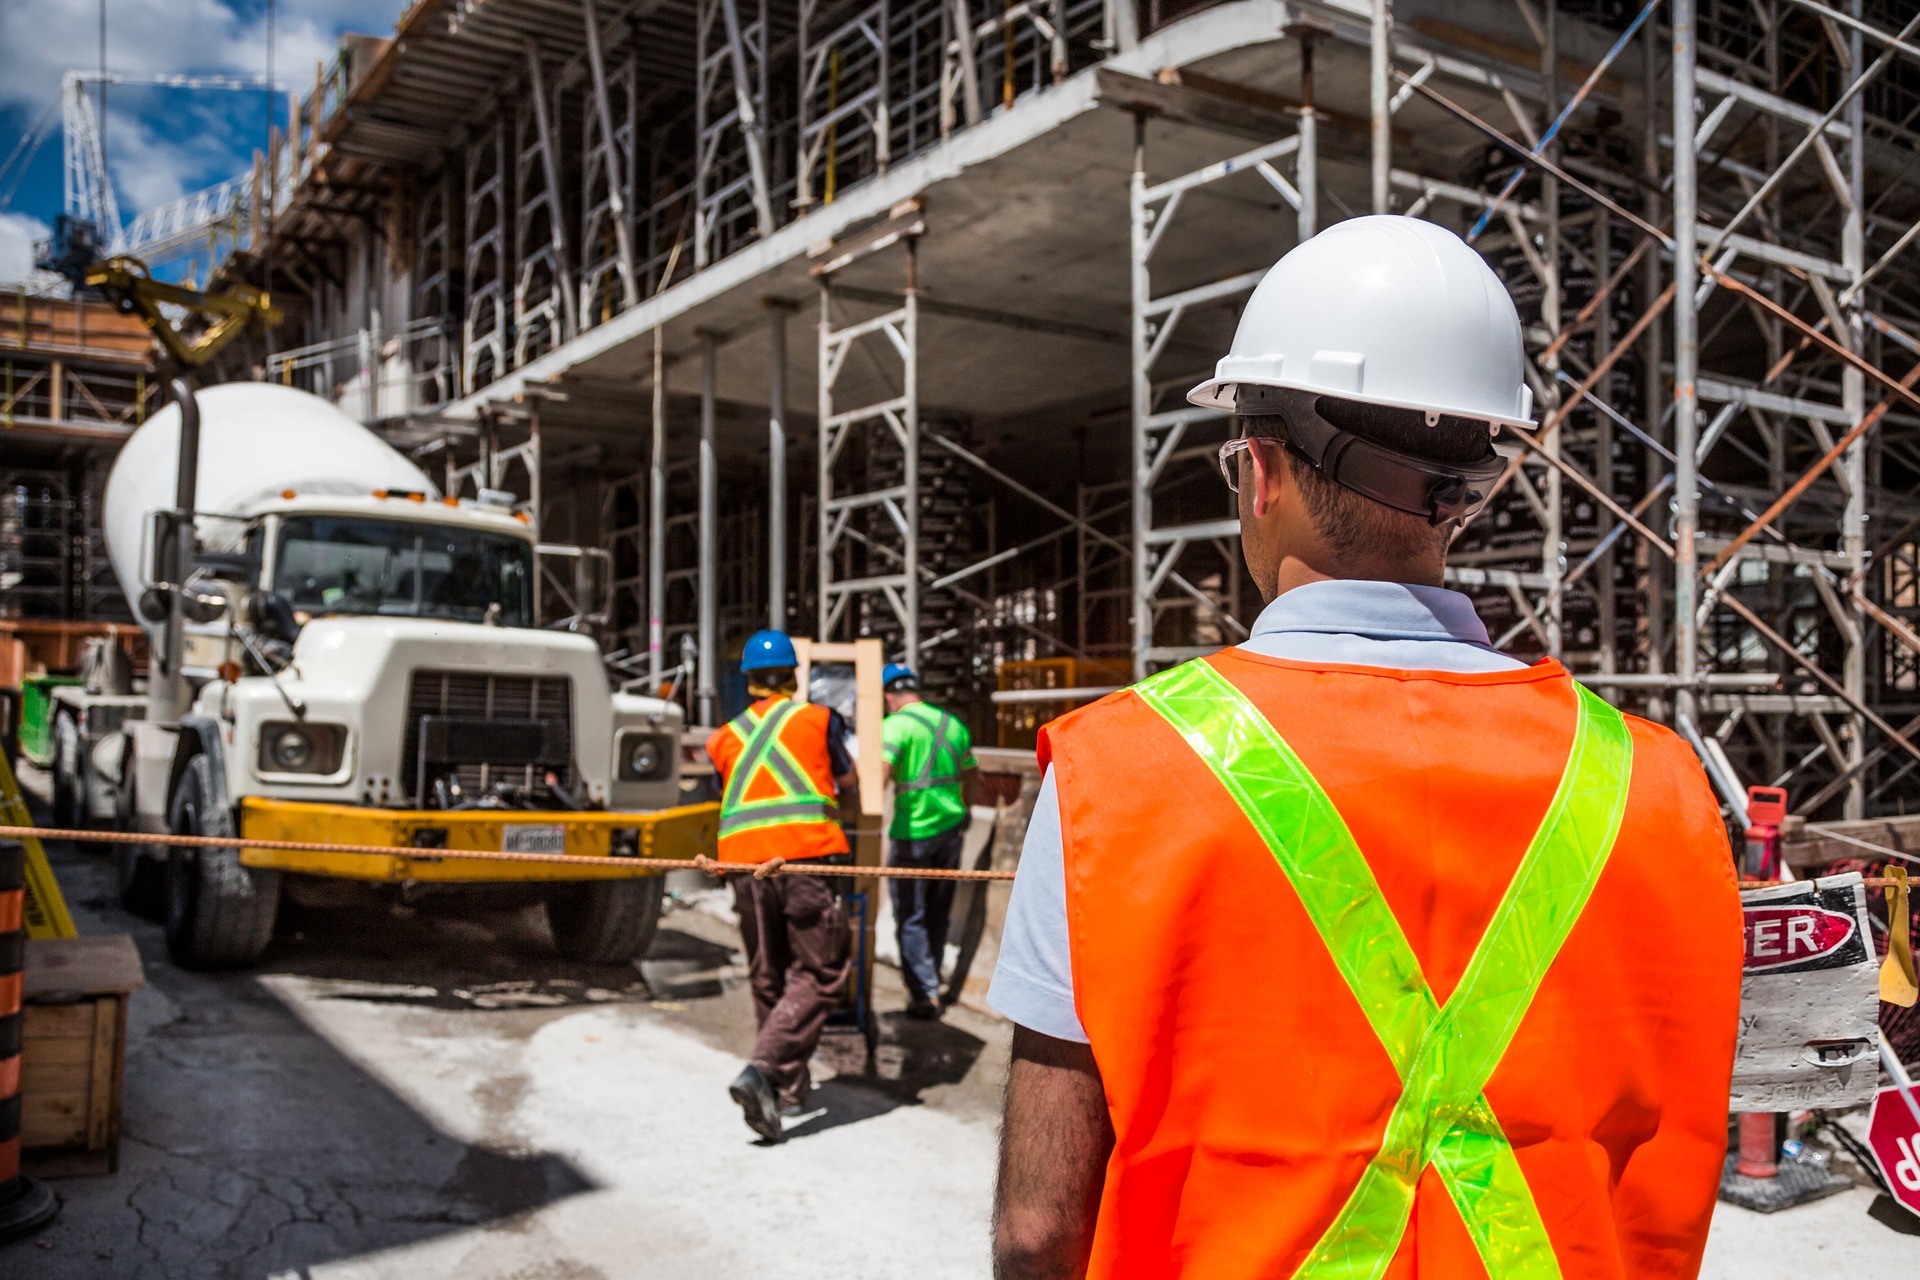 Proposed New York State Legislation Aims to Make Construction Work Safer